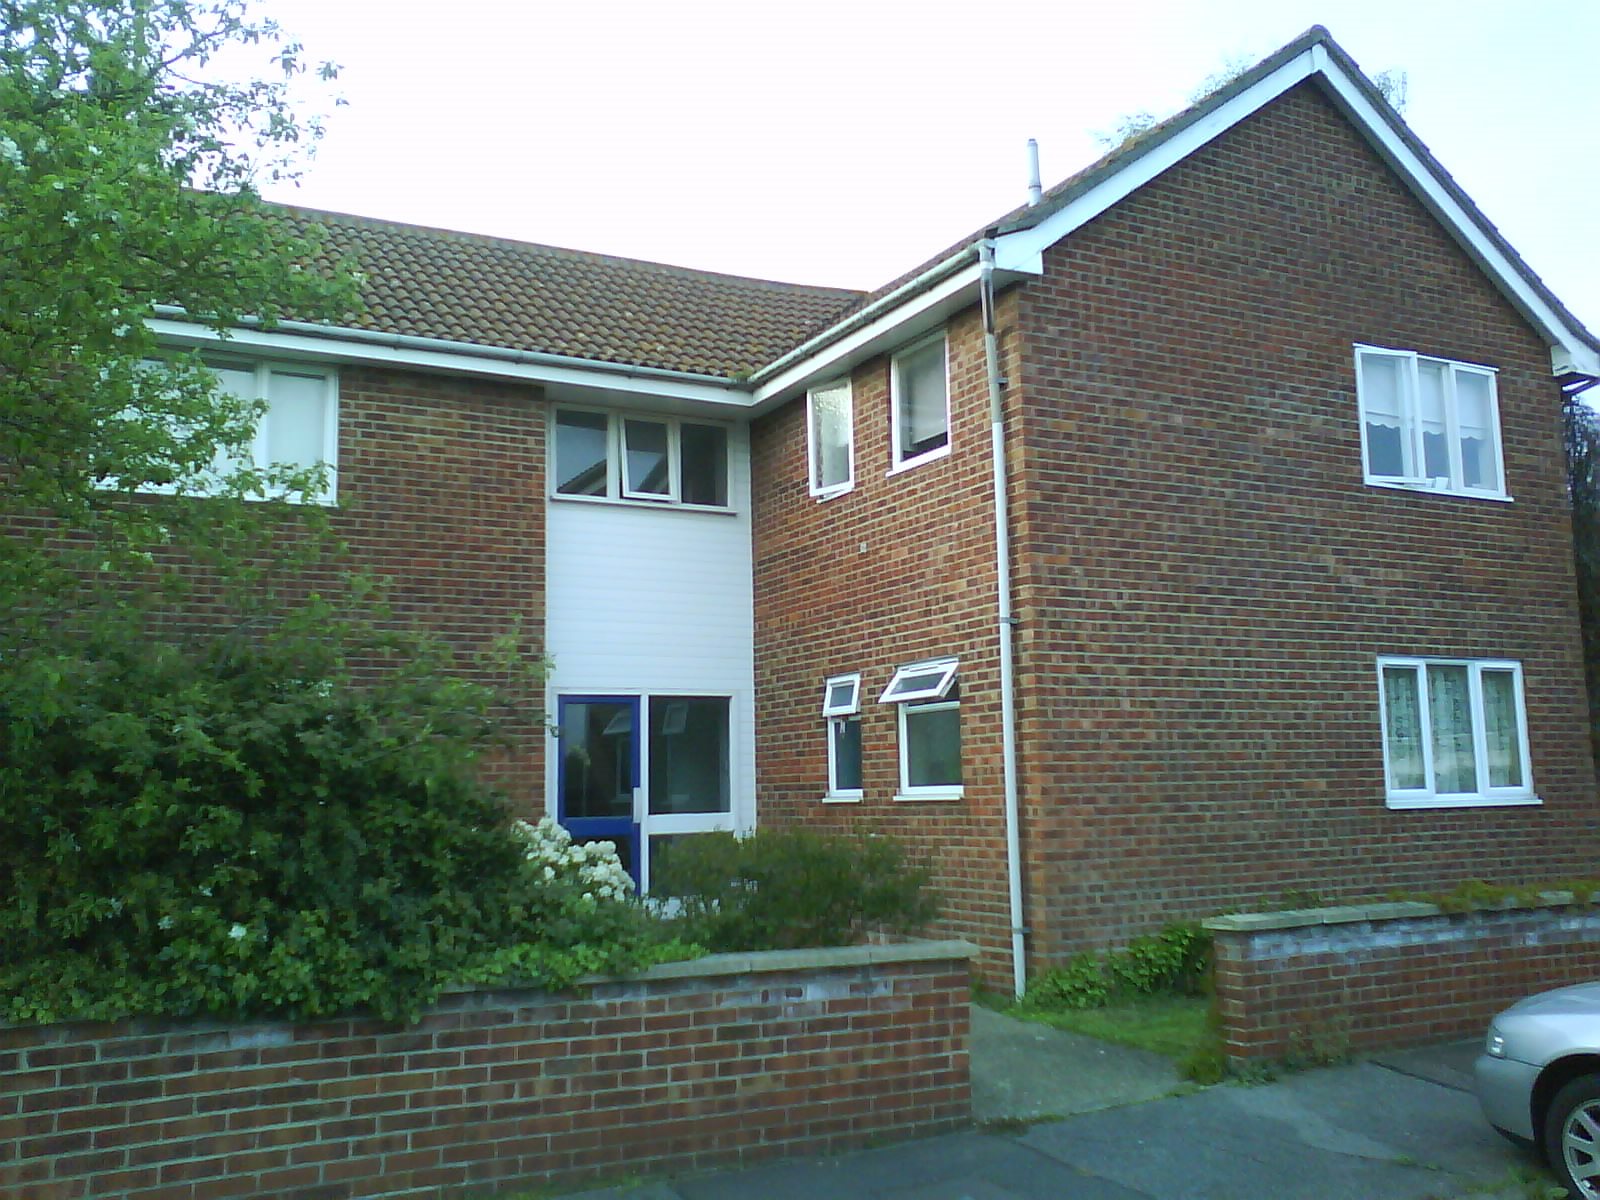 1 bed studio flat to rent in James Close, Wivenhoe, CO7 